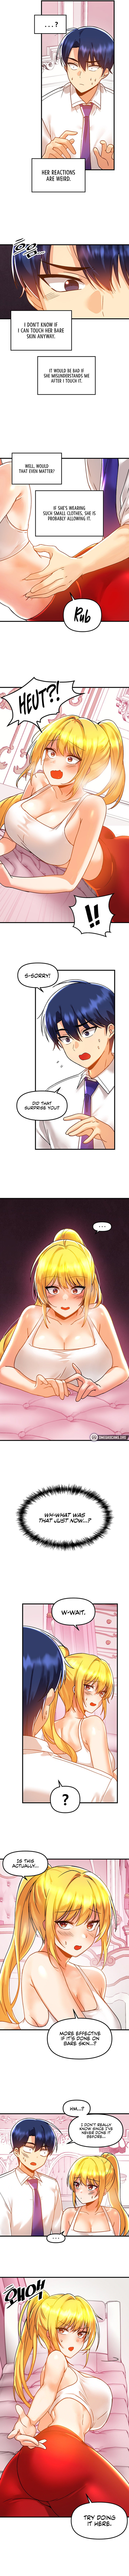 trapped-in-the-academys-eroge-chap-47-2